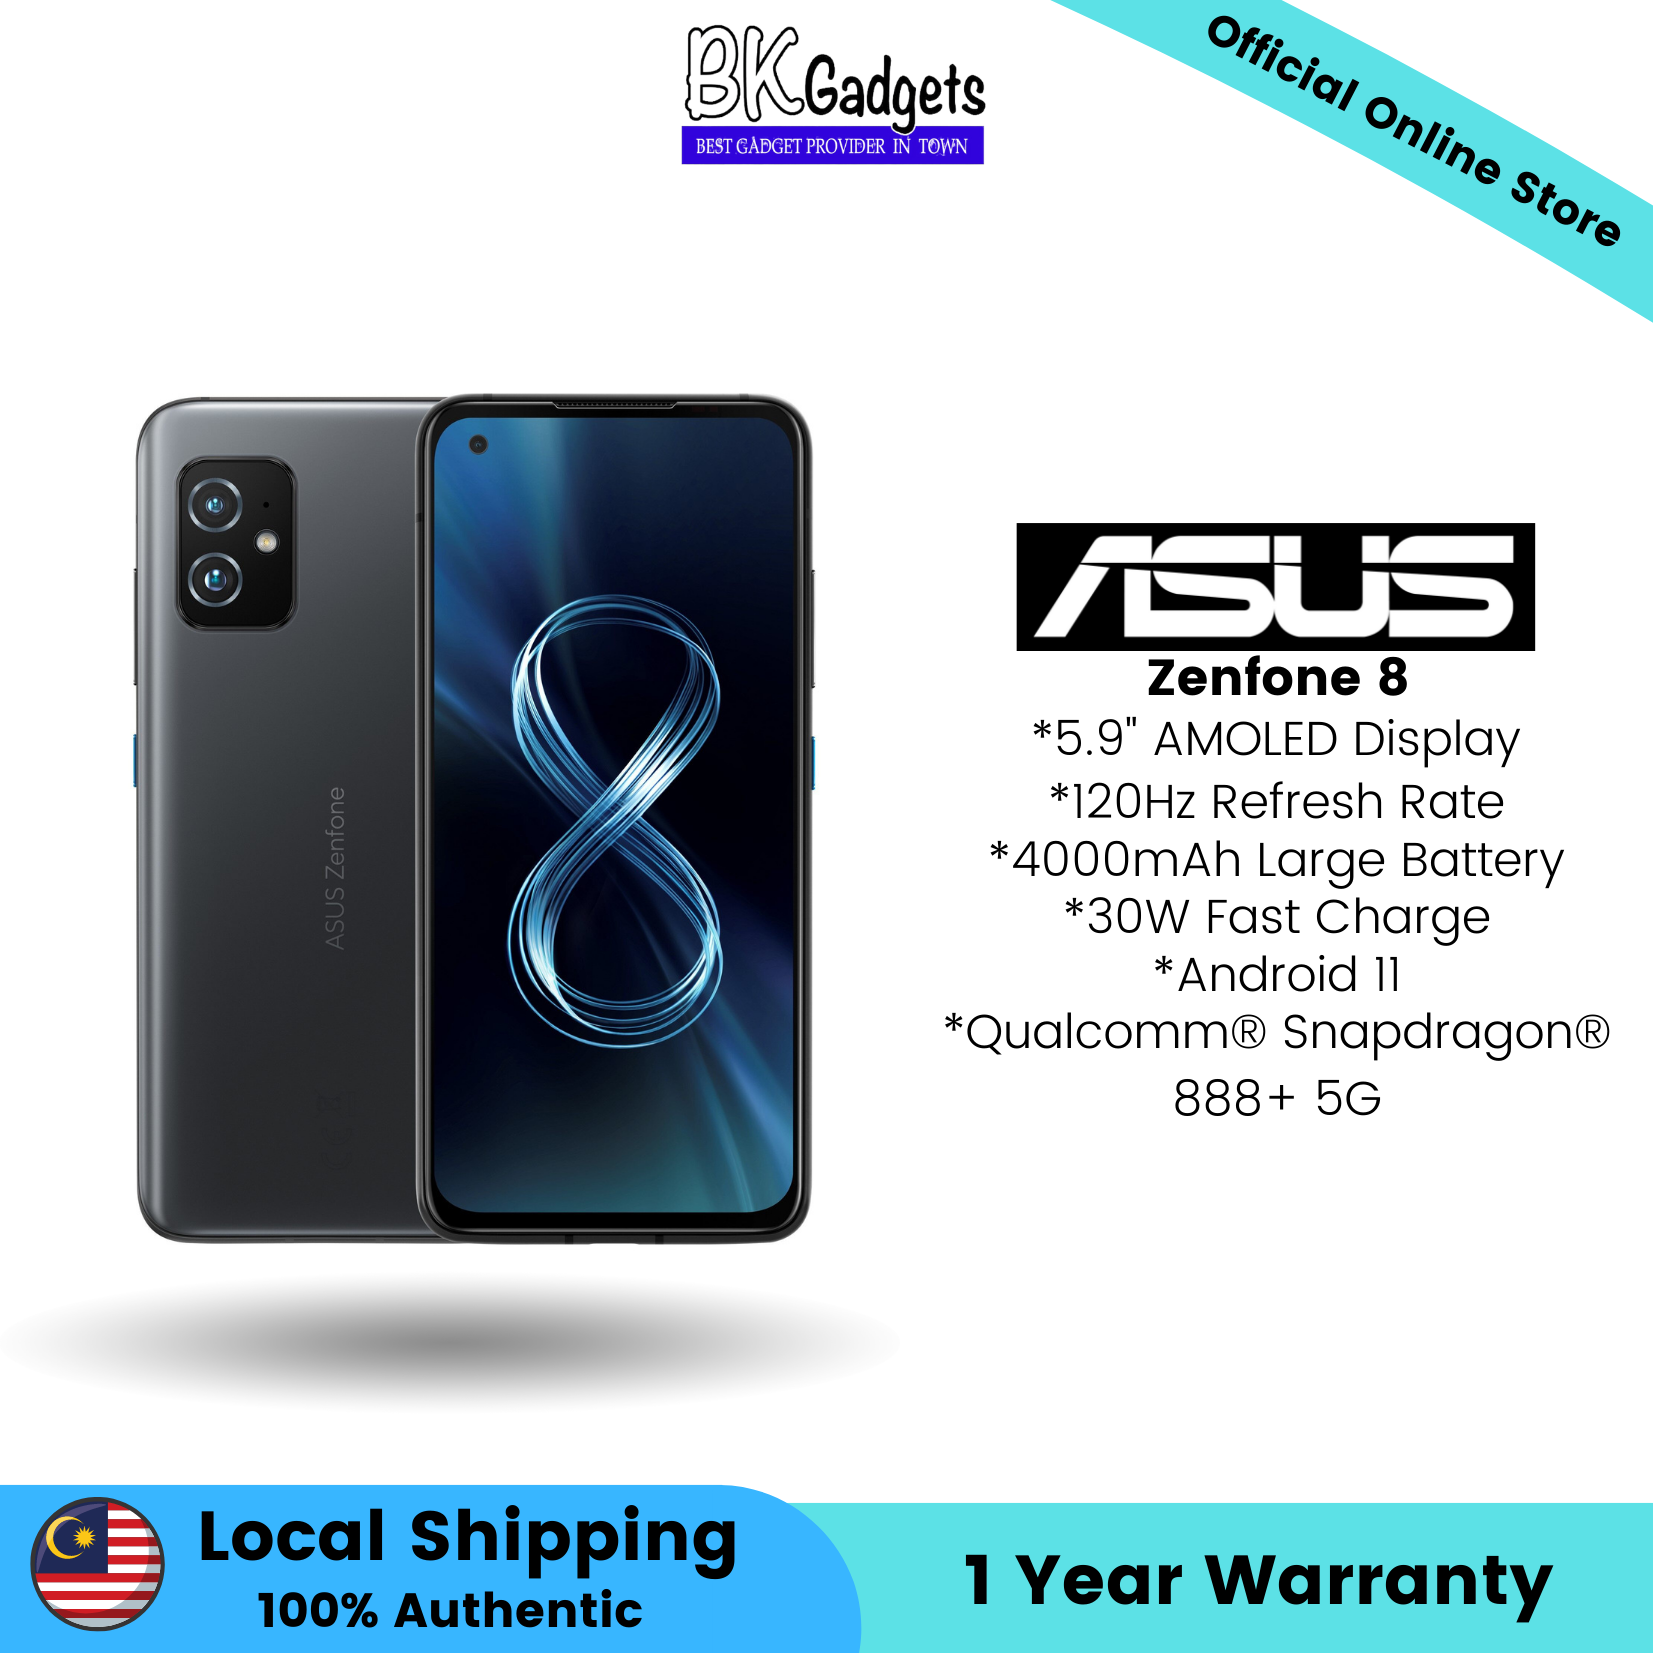 Asus Zenfone 8 - 5.9” AMOLED Display  4000mAh Large Battery  30W Fast Charge